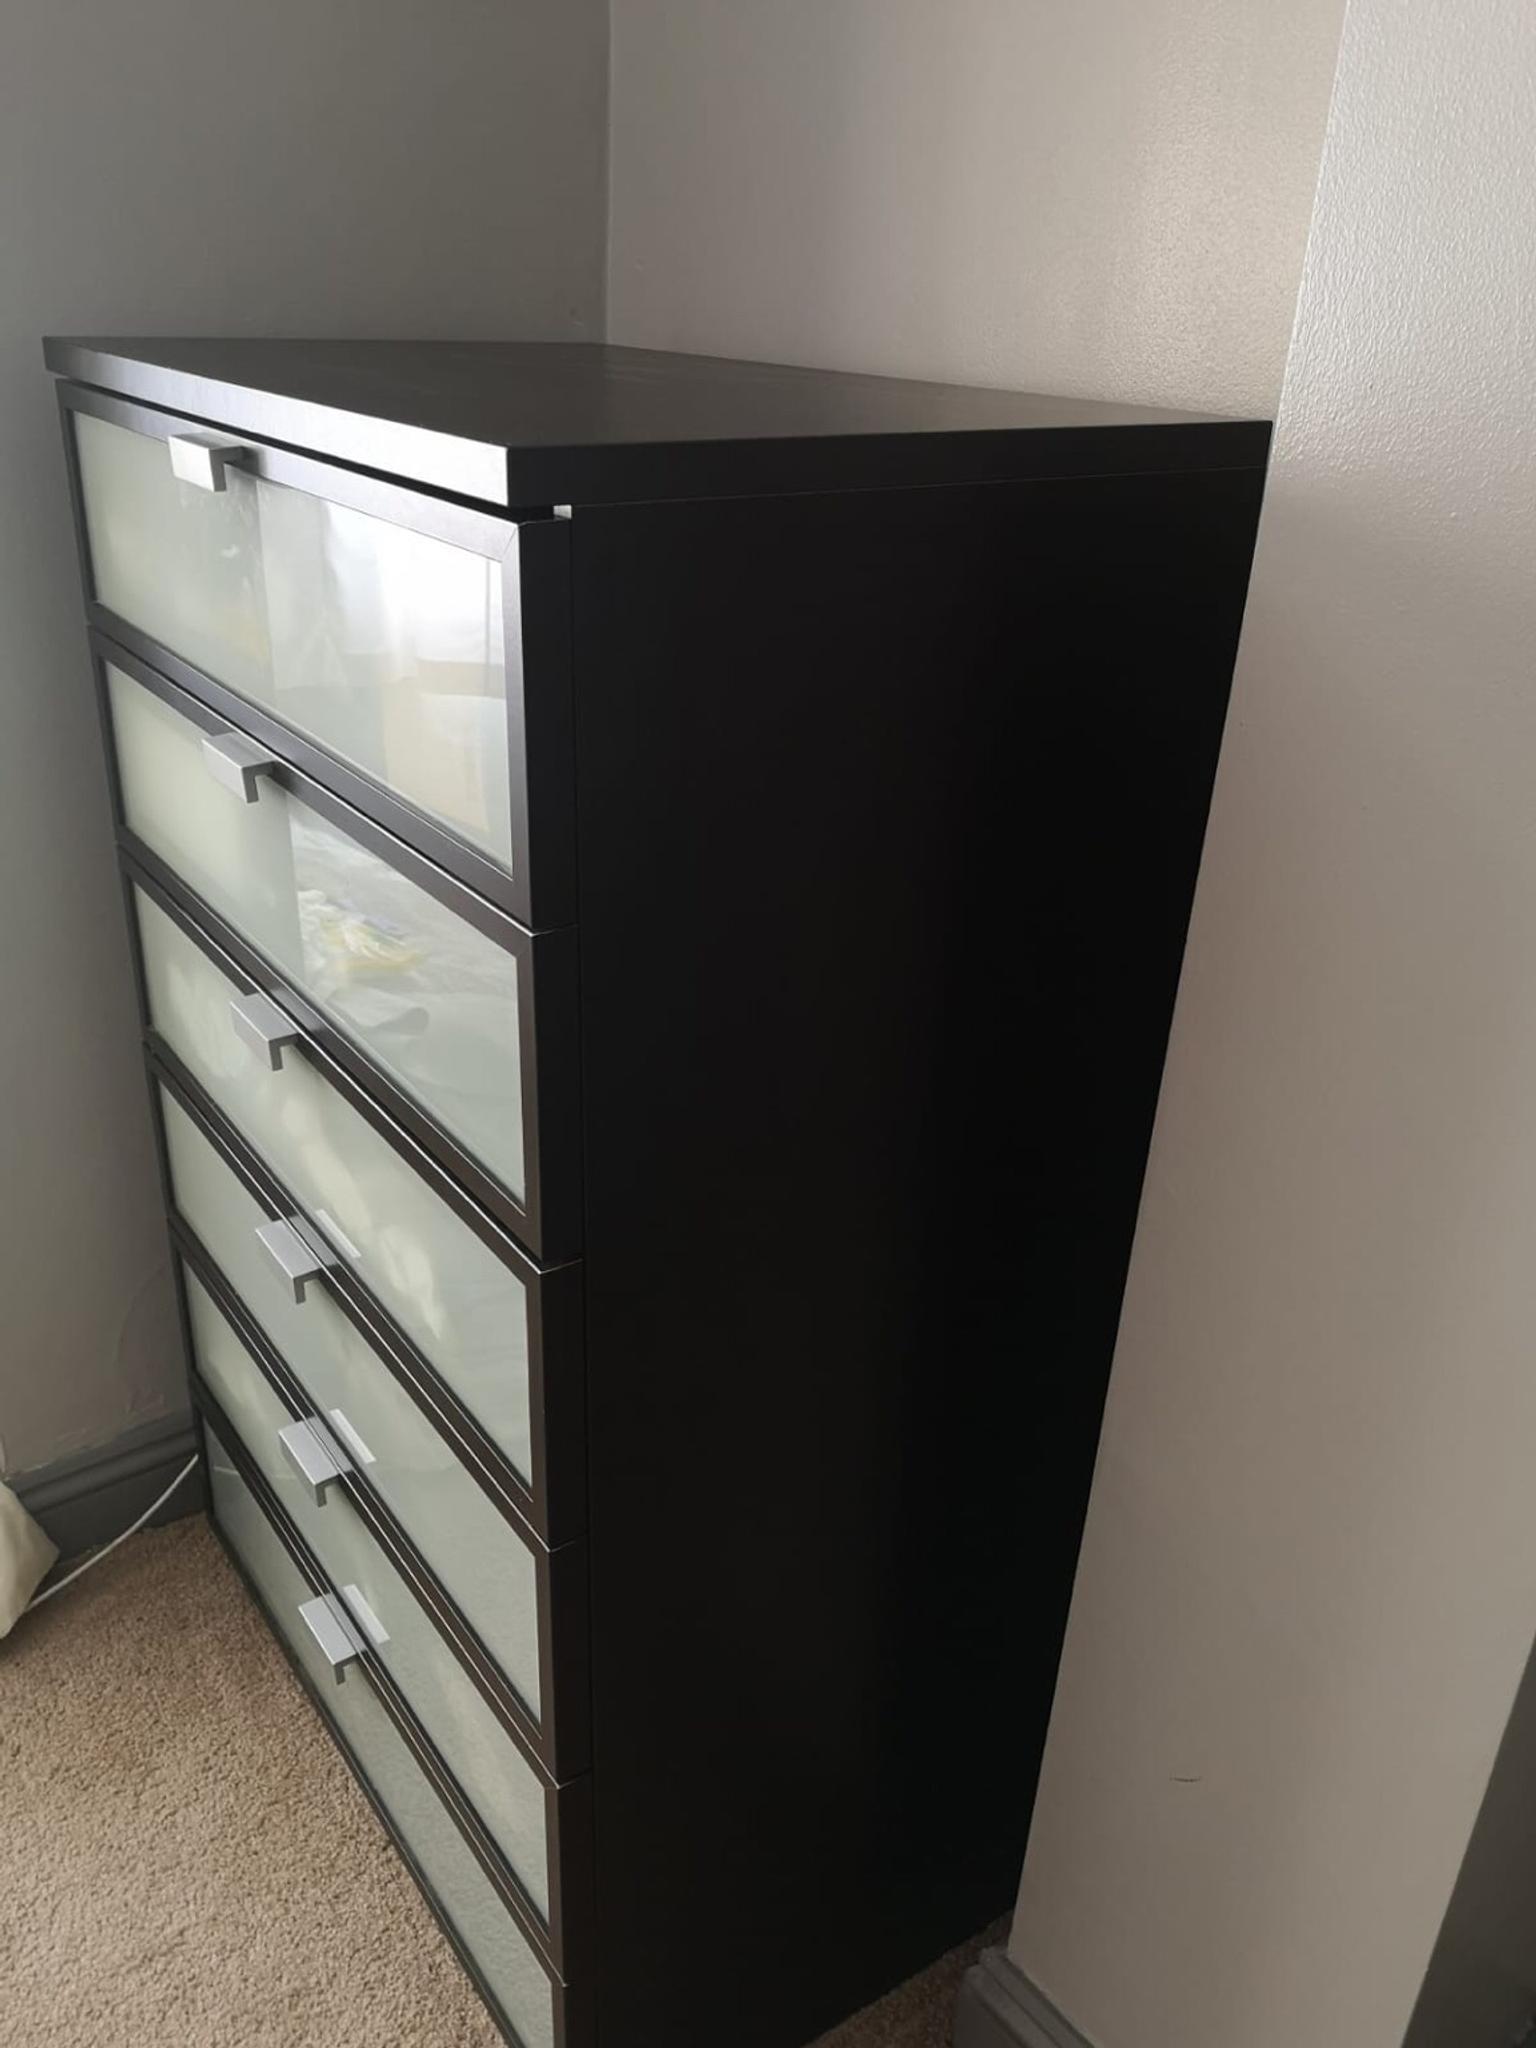 Ikea Hopen Chest Of Drawers In E5, Ikea Frosted Glass Dresser Hopen